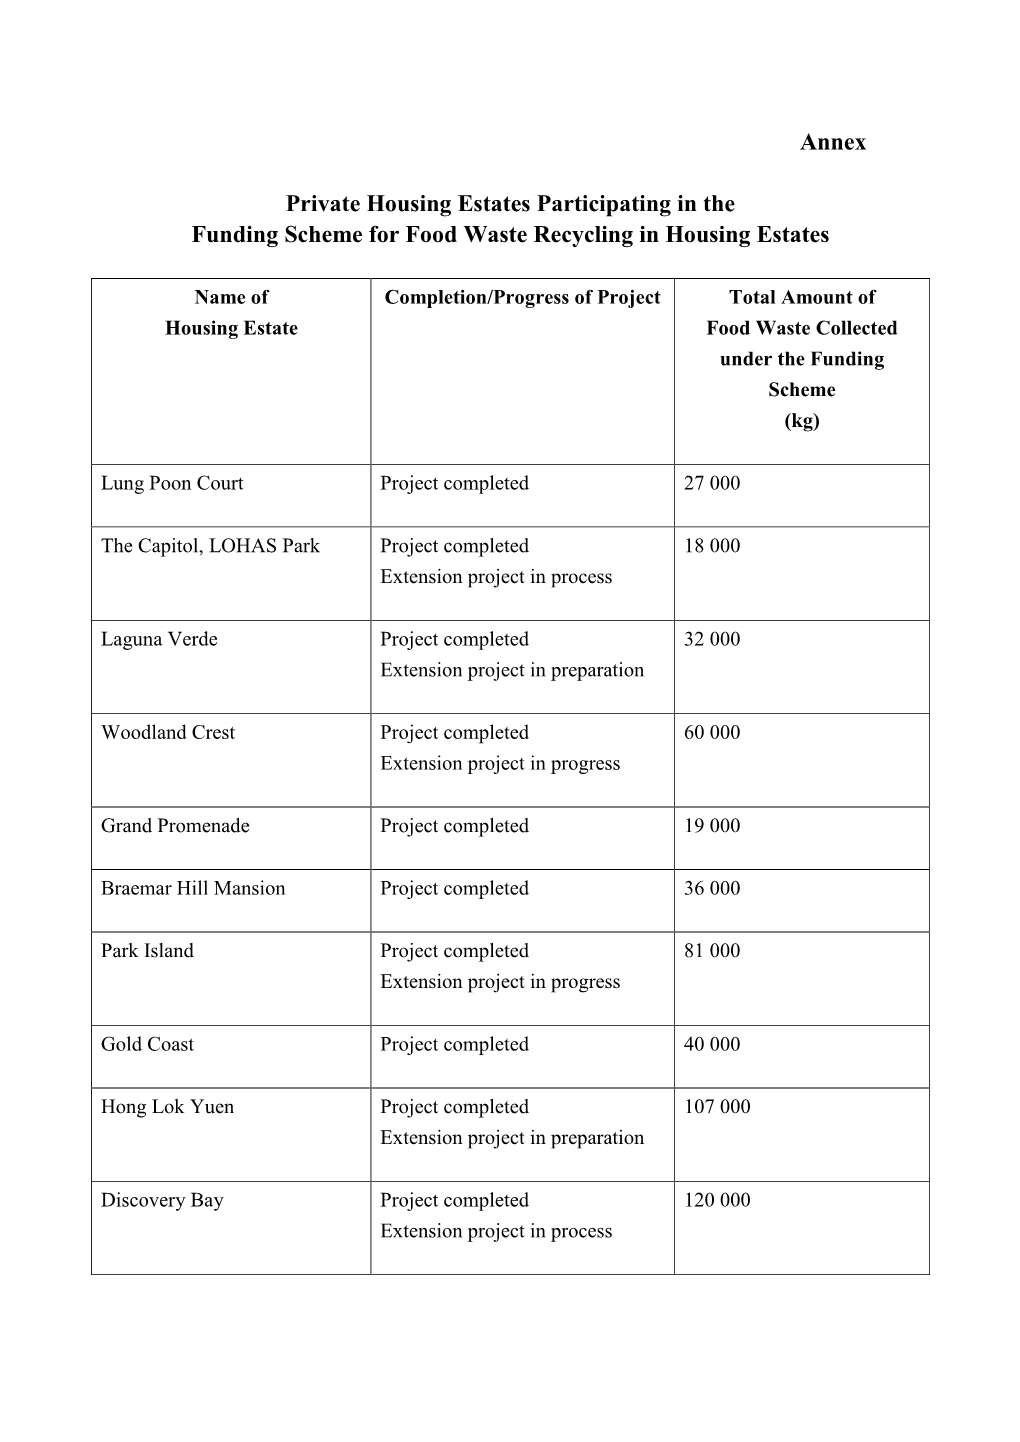 Annex Private Housing Estates Participating in the Funding